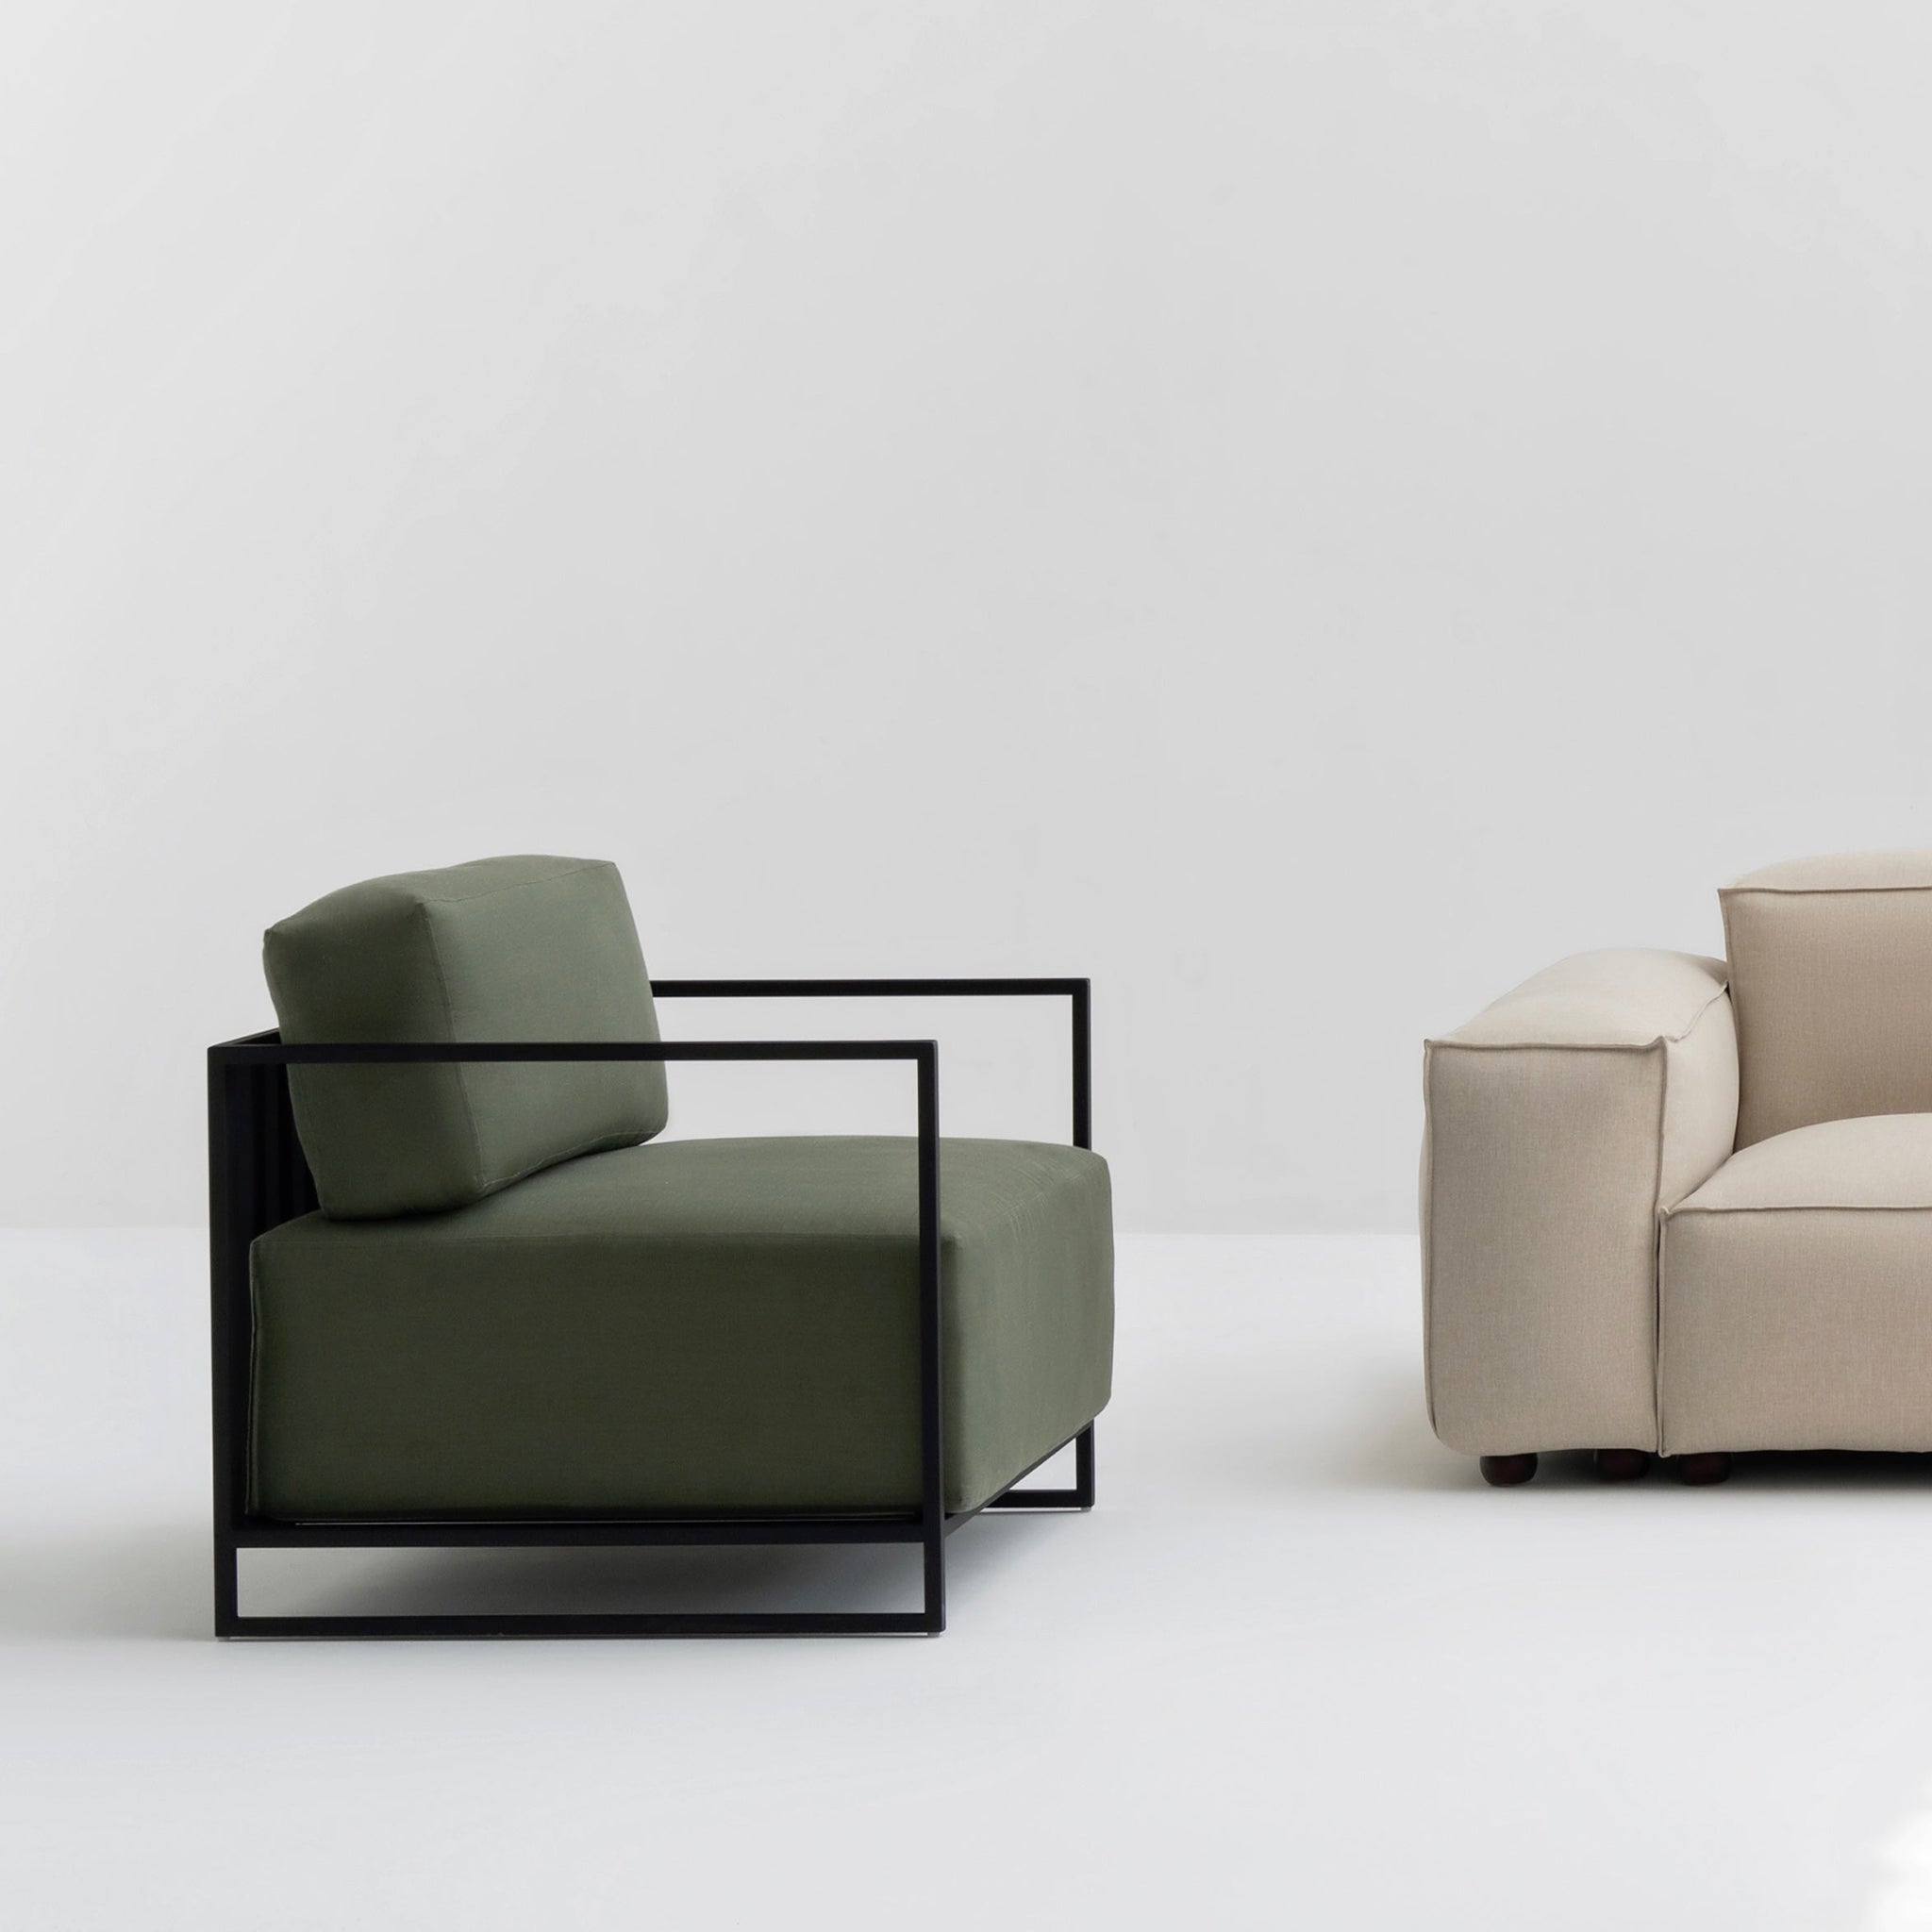 Modern interior featuring The Dexter Accent Chair with olive green cushions and a sleek black metal frame, positioned next to a beige sofa on a white background.